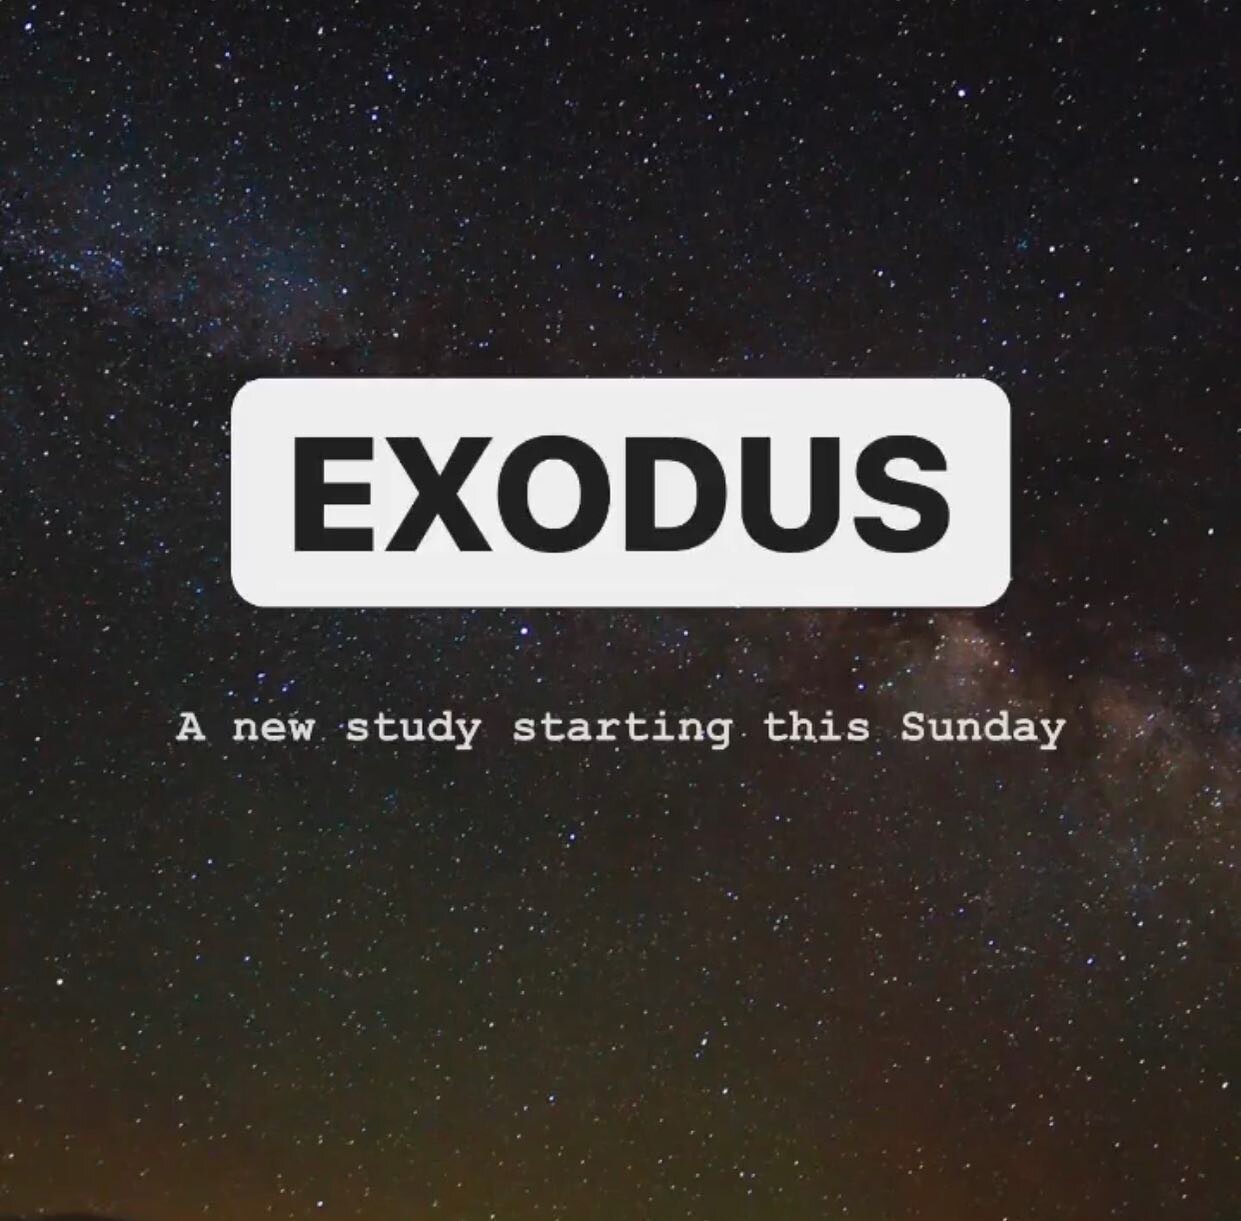 Come join us at 10:30am this Sunday as we start a new study.